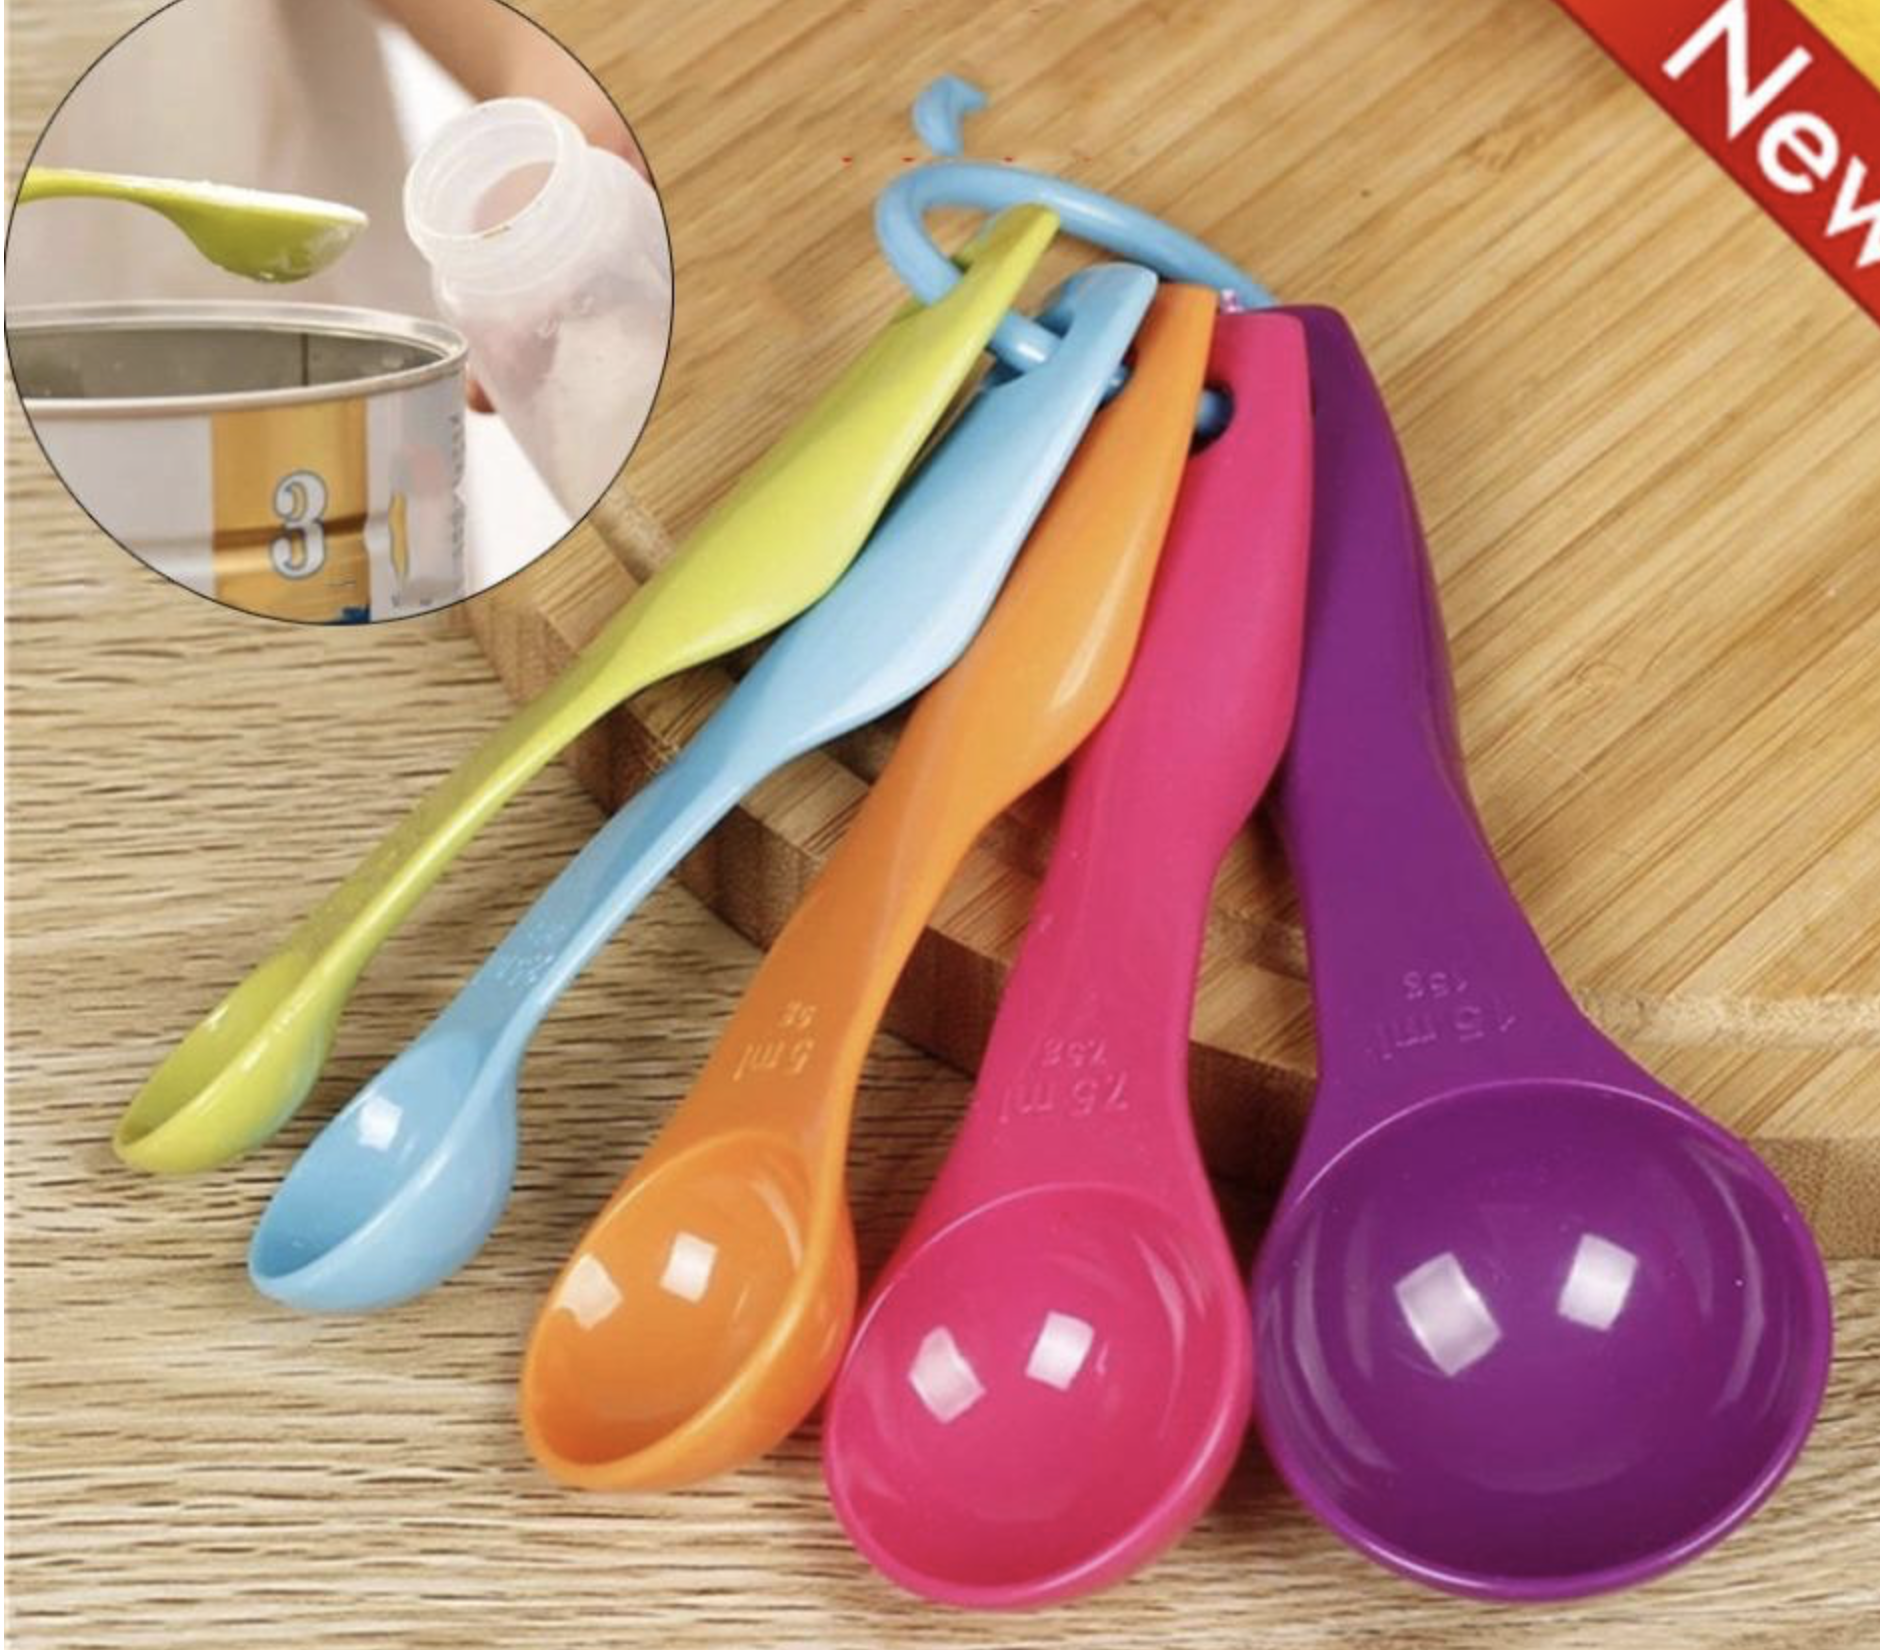 https://www.science2life.com/wp-content/uploads/2020/07/spoons-being-used.png